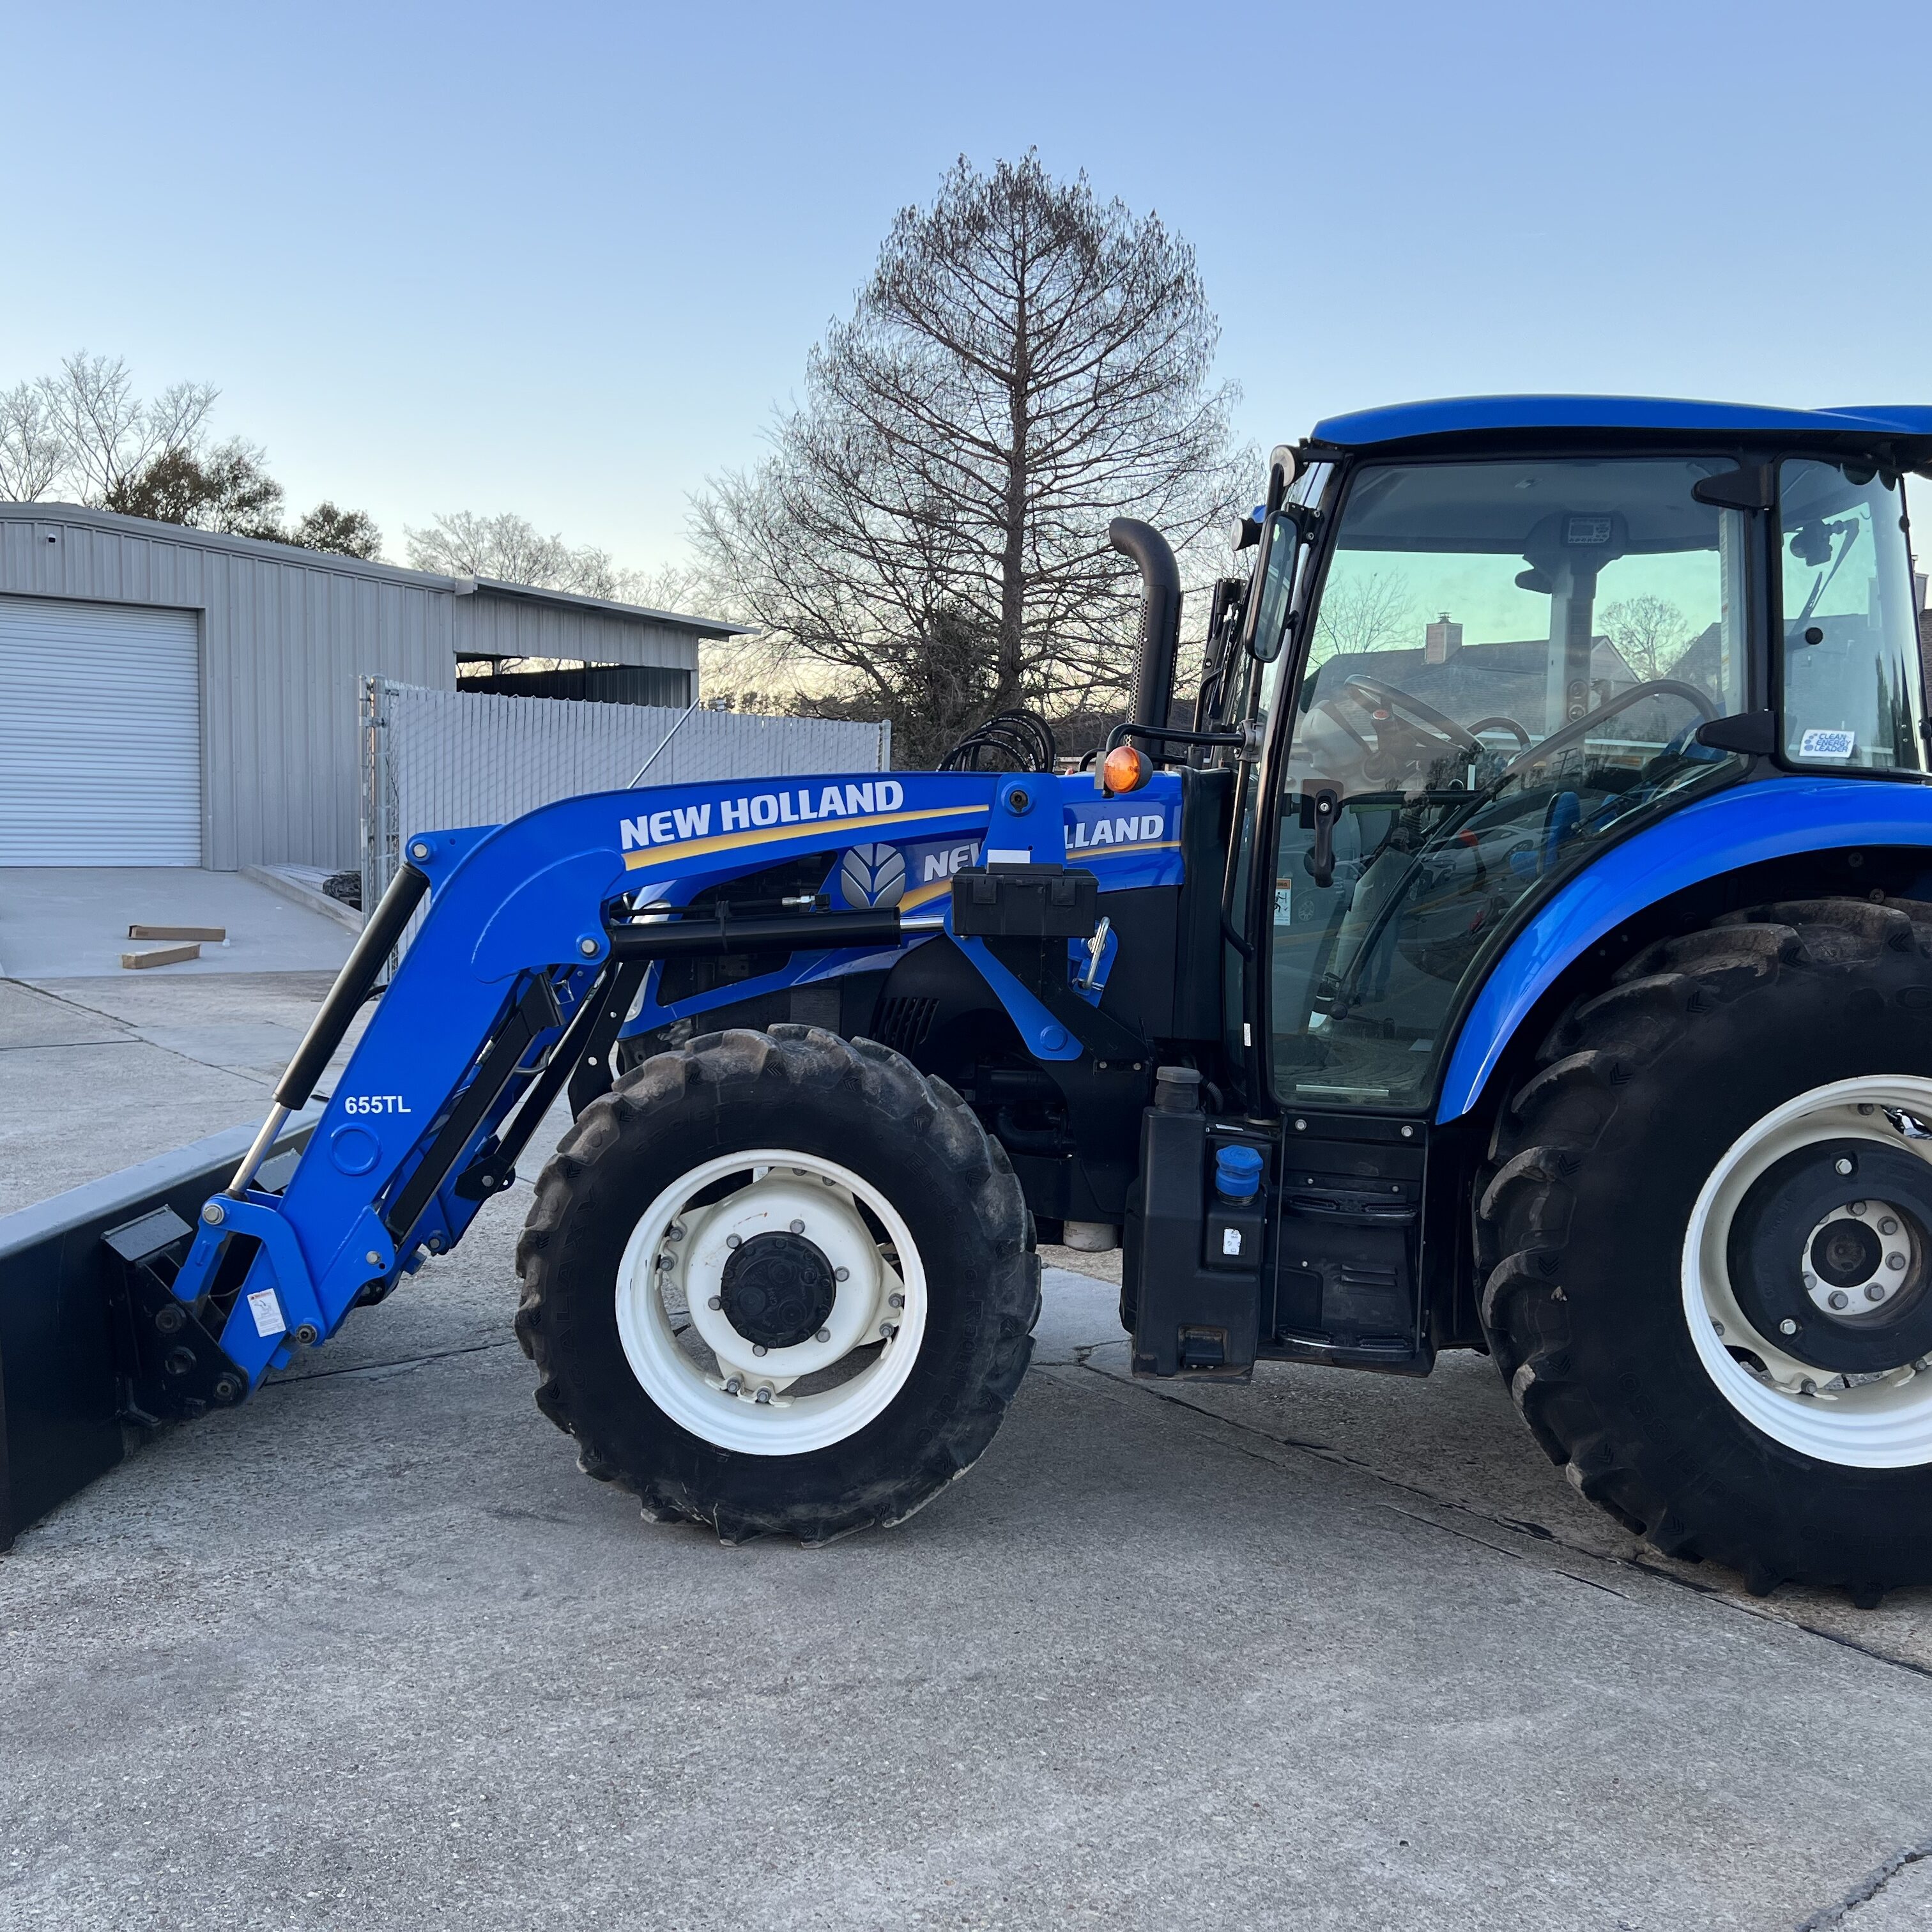 New Holland T4.120 CAB Tractor 118HP 4WD Loader 12/12 Hydraulic Shuttle Buddy Seat Excellent Condition!